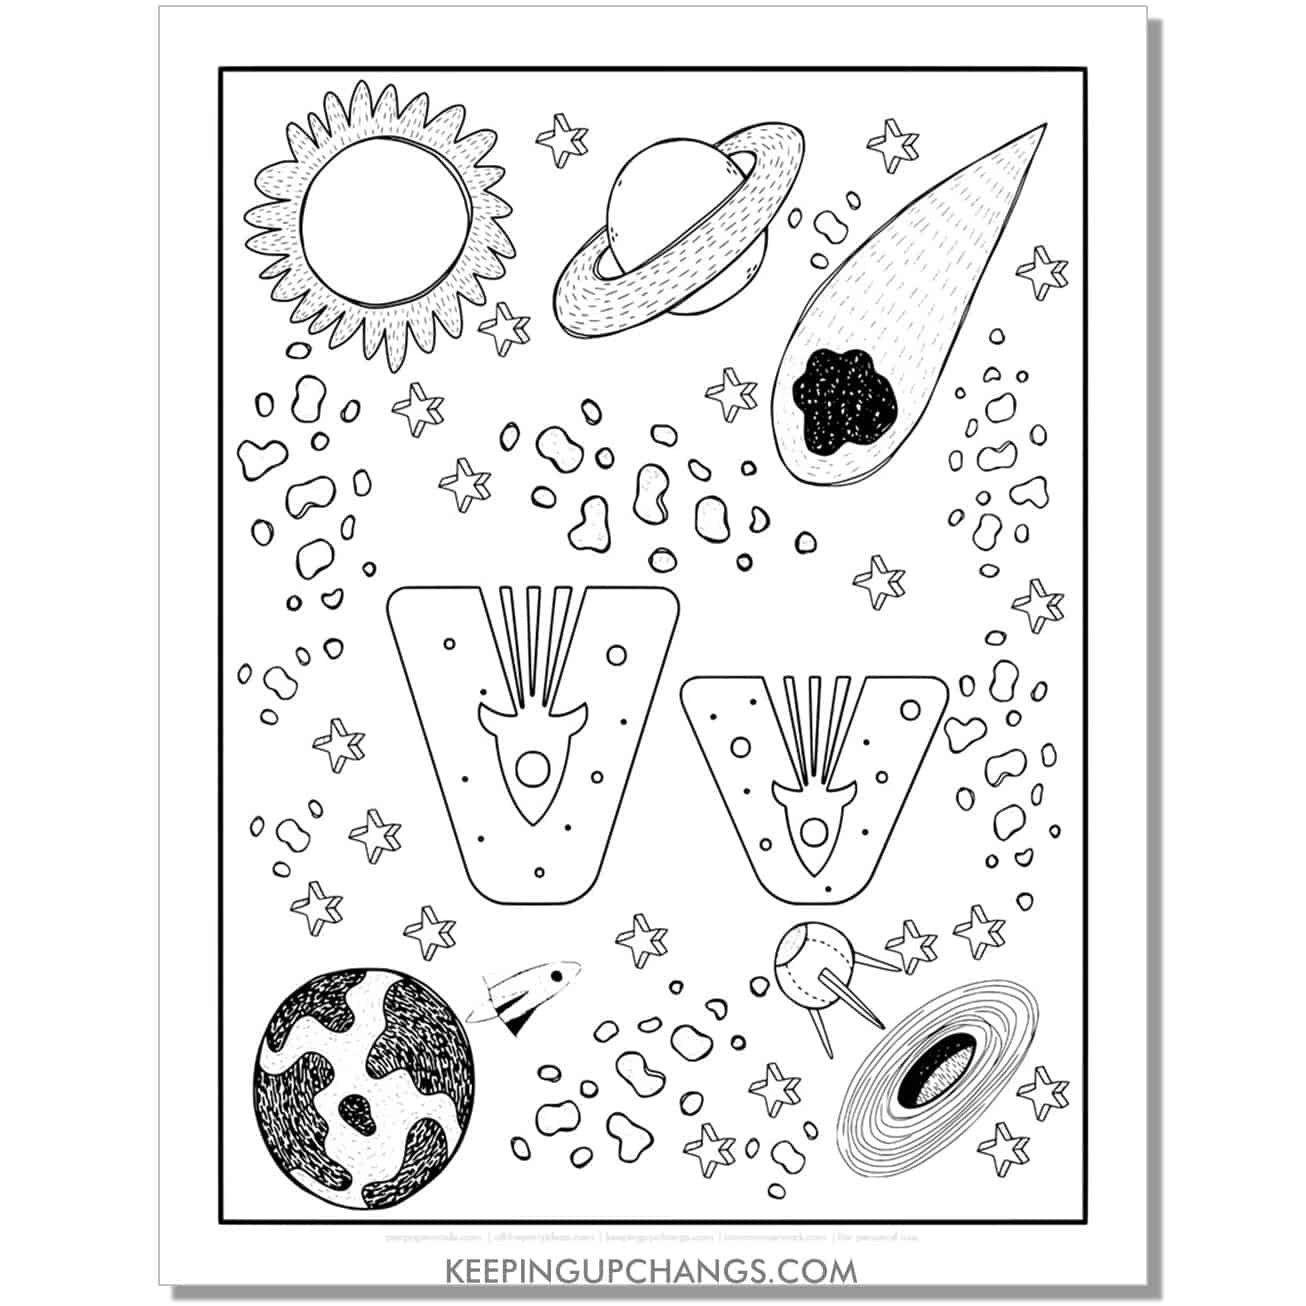 free alphabet letter v coloring page for kids with rockets, space theme.